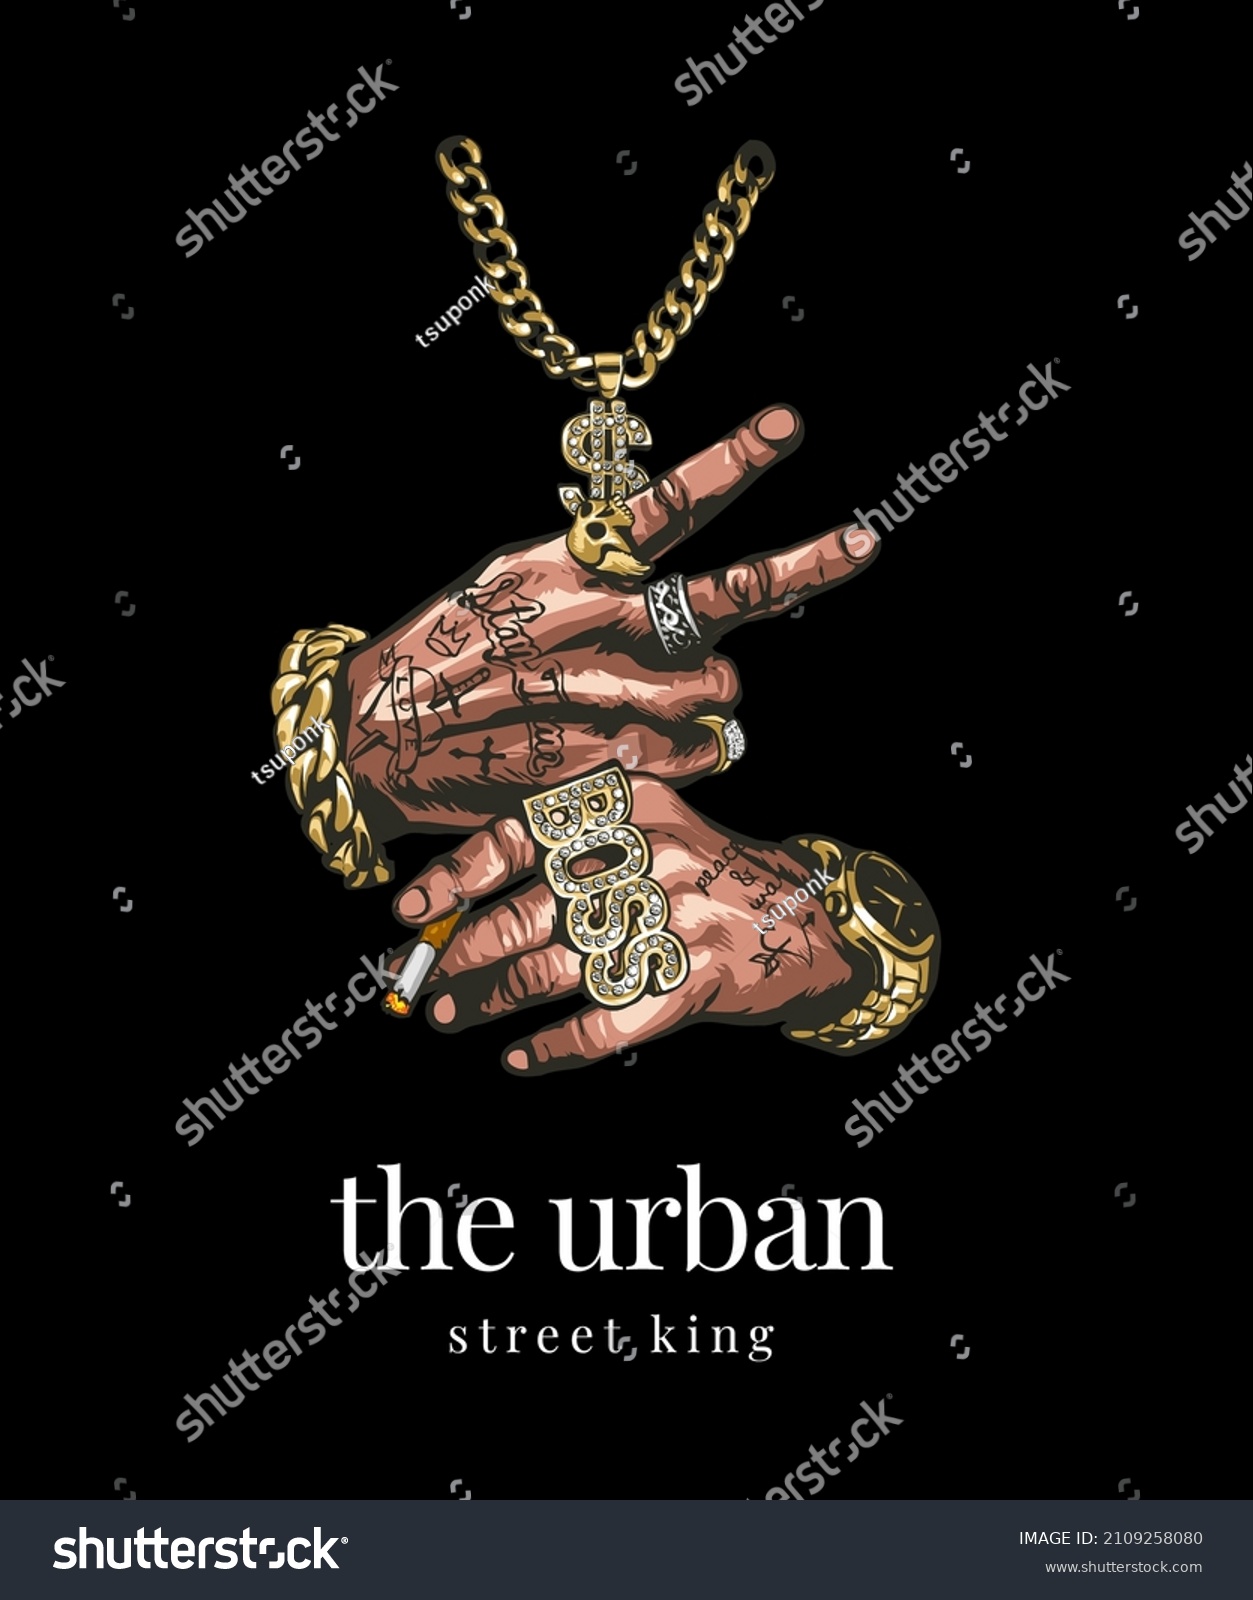 SVG of urban slogan with tattooed hand in gold acccessories holding cigarette on black background svg